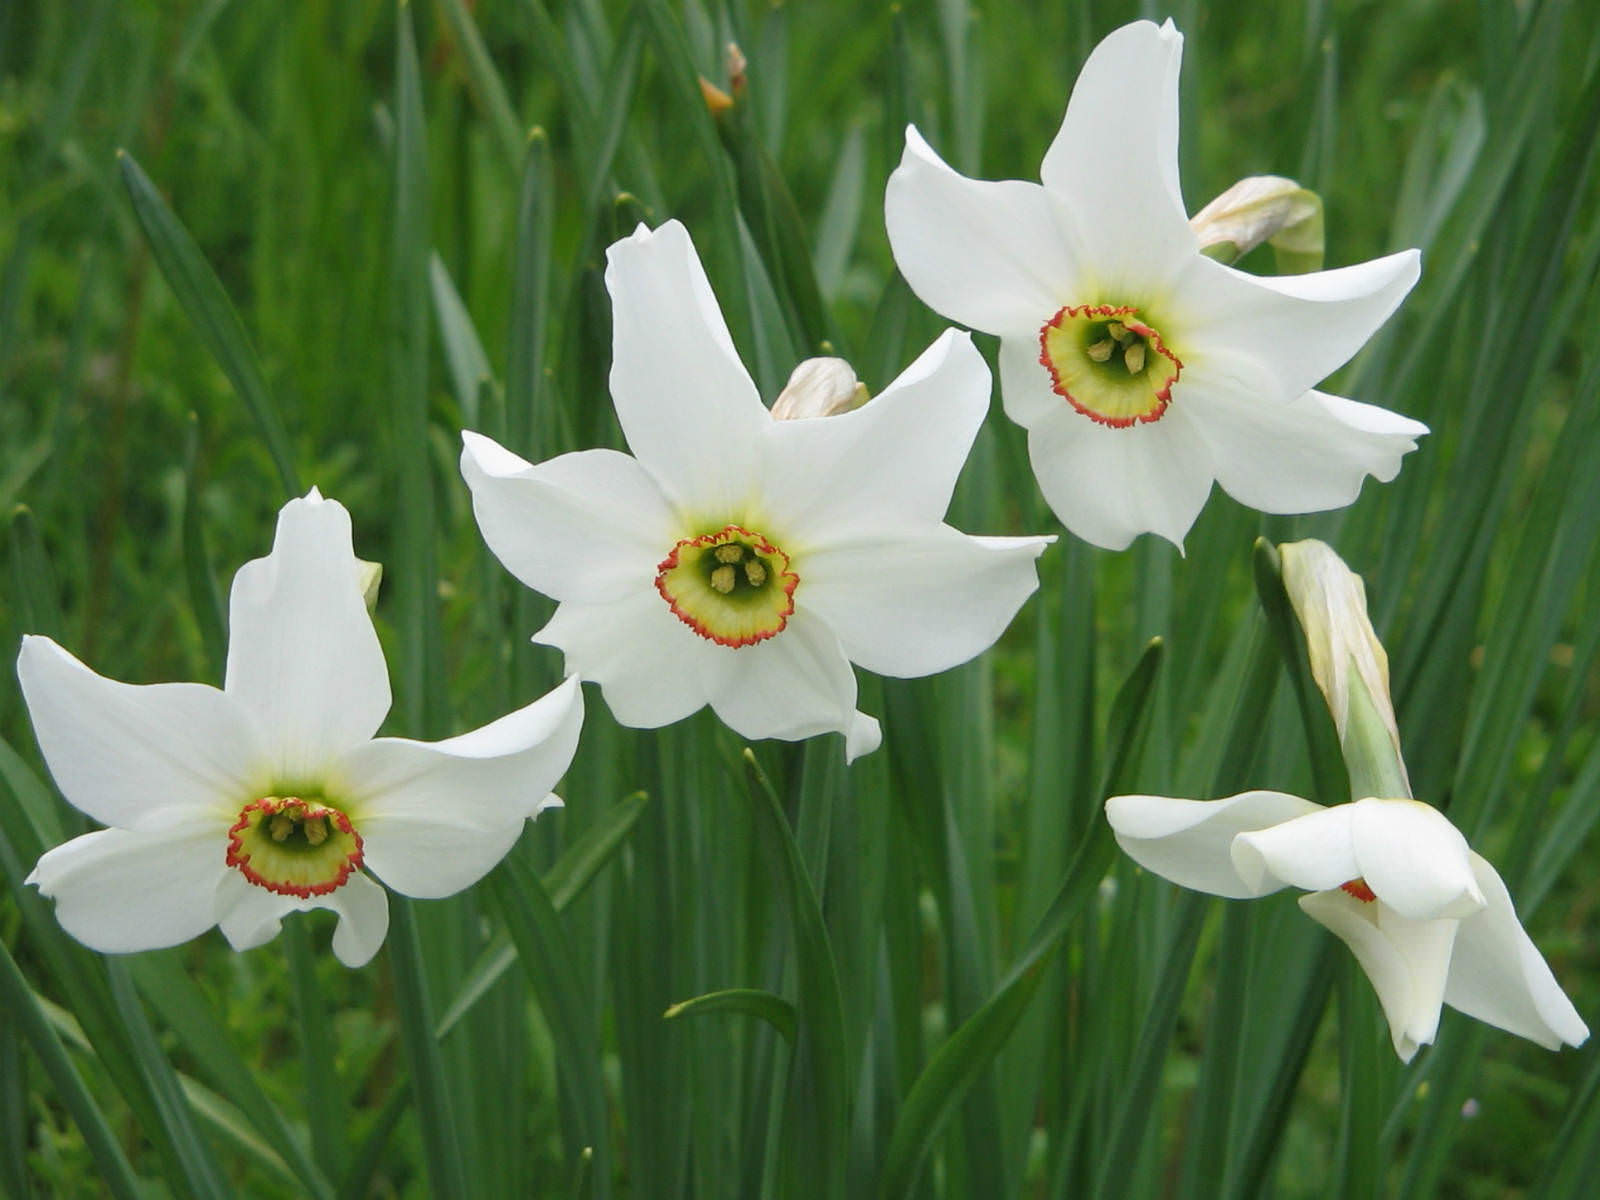 Narcissus poeticus - Poet's Narcissus | World of Flowering Plants